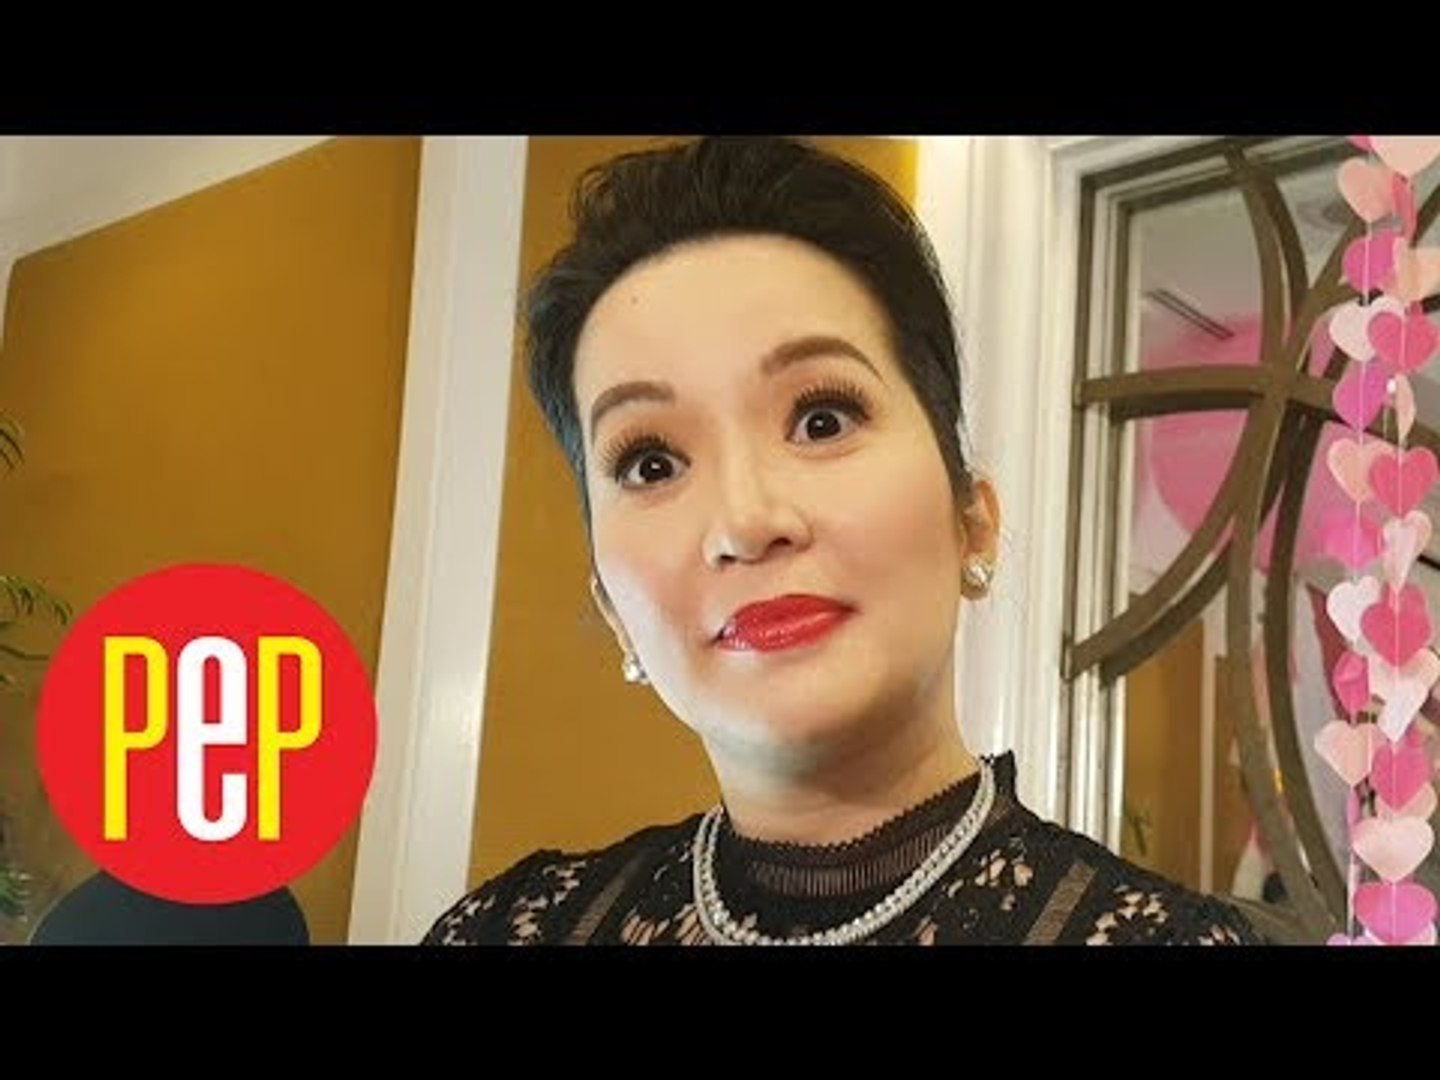 Watch how Kris Aquino reacted when asked about ring given to her by Mayor Herbert